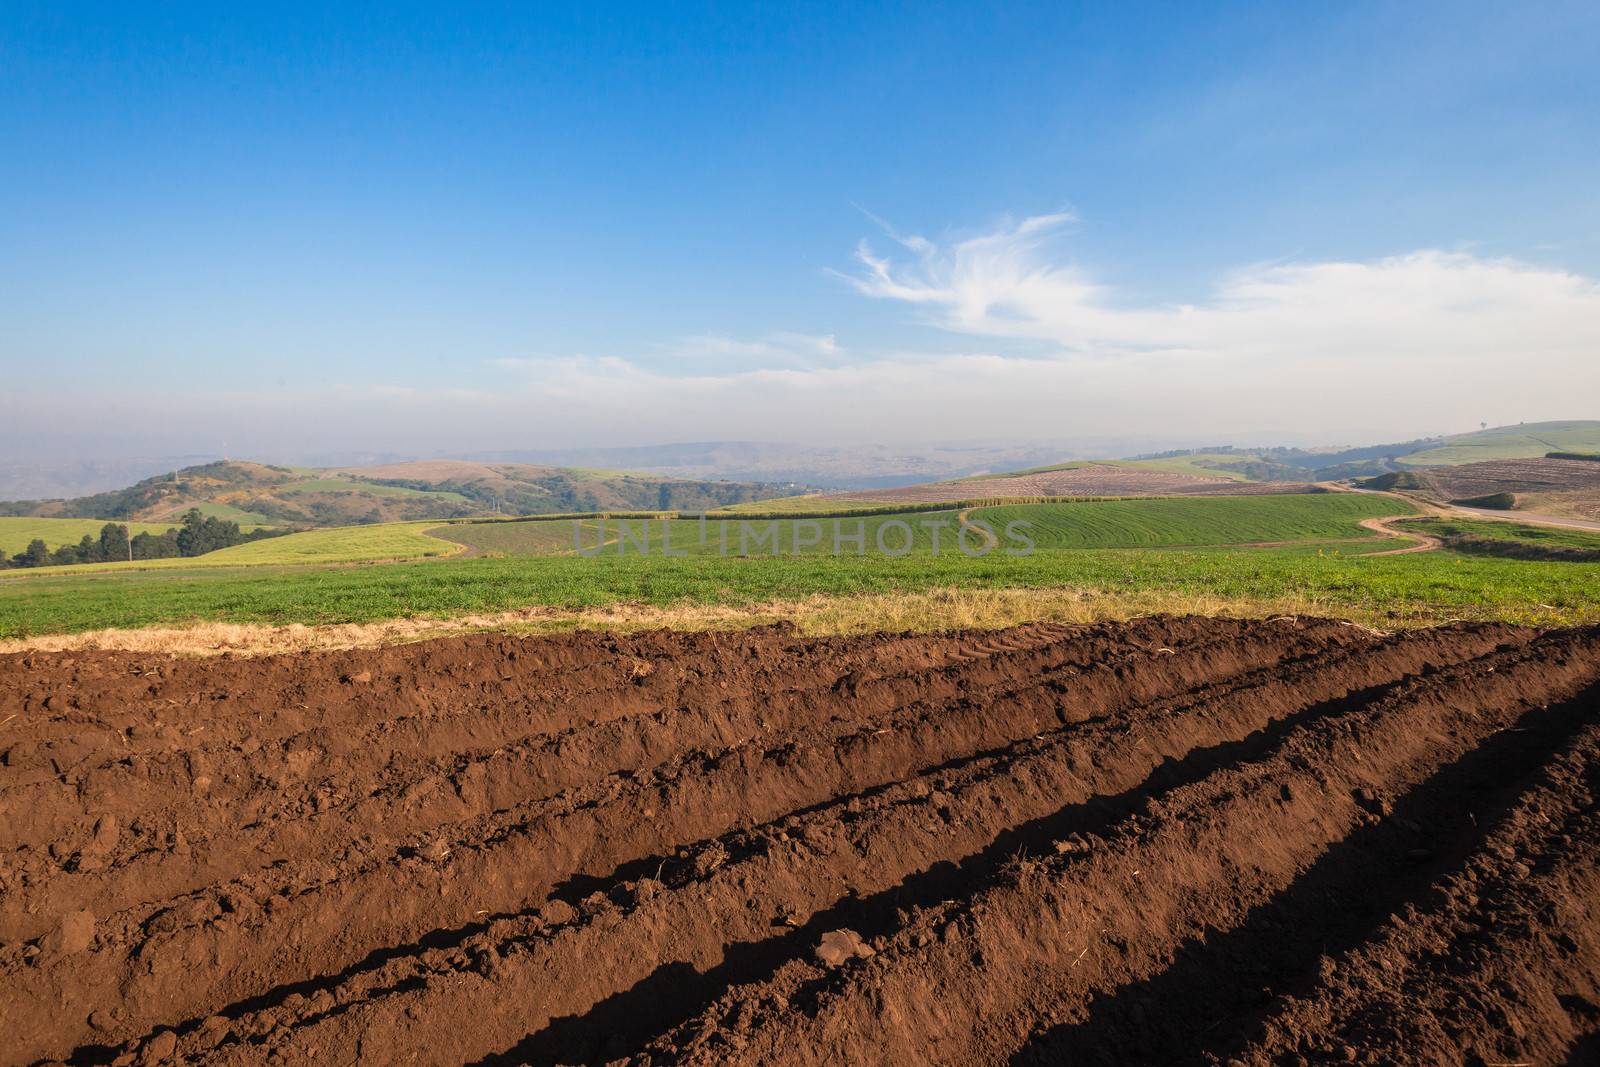 Earth soil plowed ready for planting crops in new season of farming agriculture.